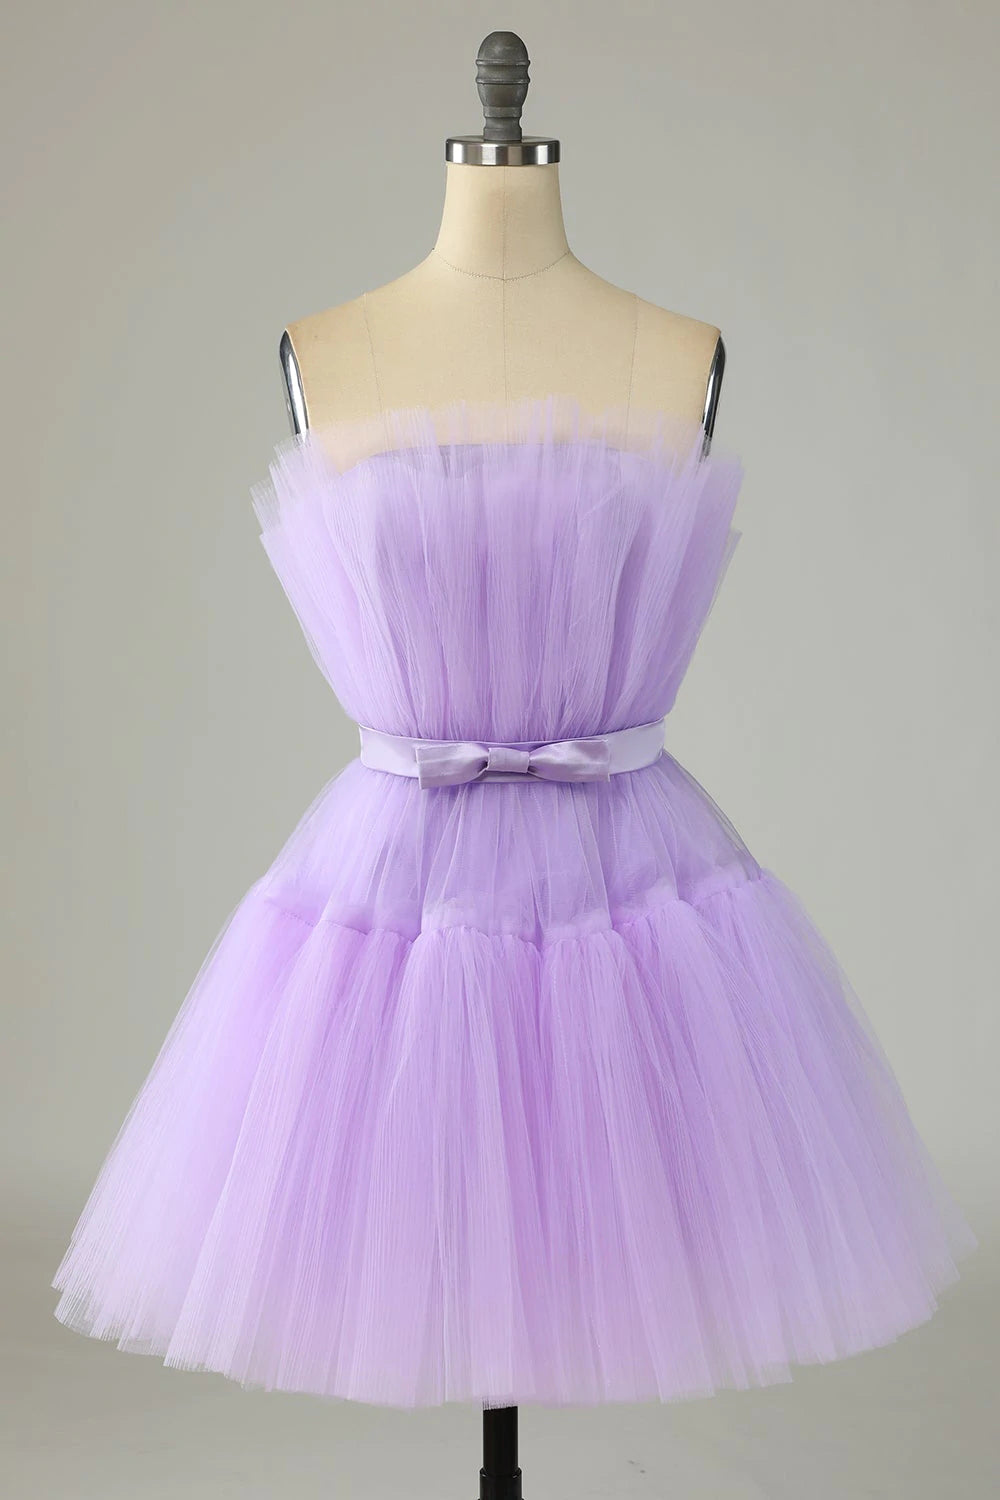 Cute Lavender Strapless Tulle Lavender Homecoming Dresses, Short Party Dress with Bowknot GM519